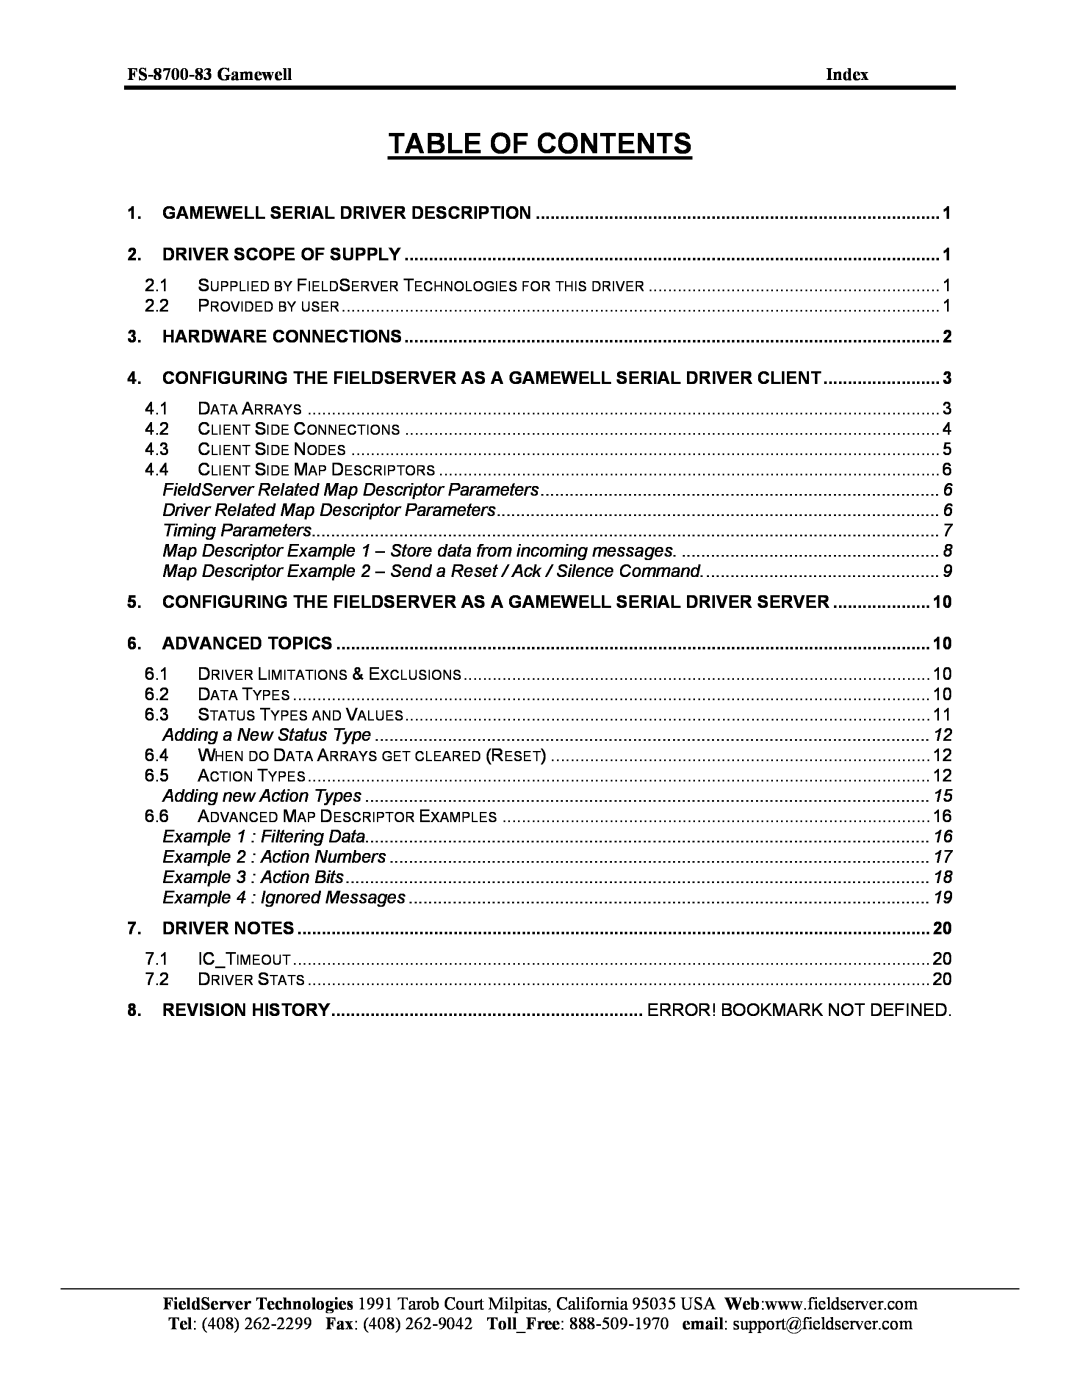 FieldServer instruction manual Table Of Contents, FS-8700-83 Gamewell, Index 